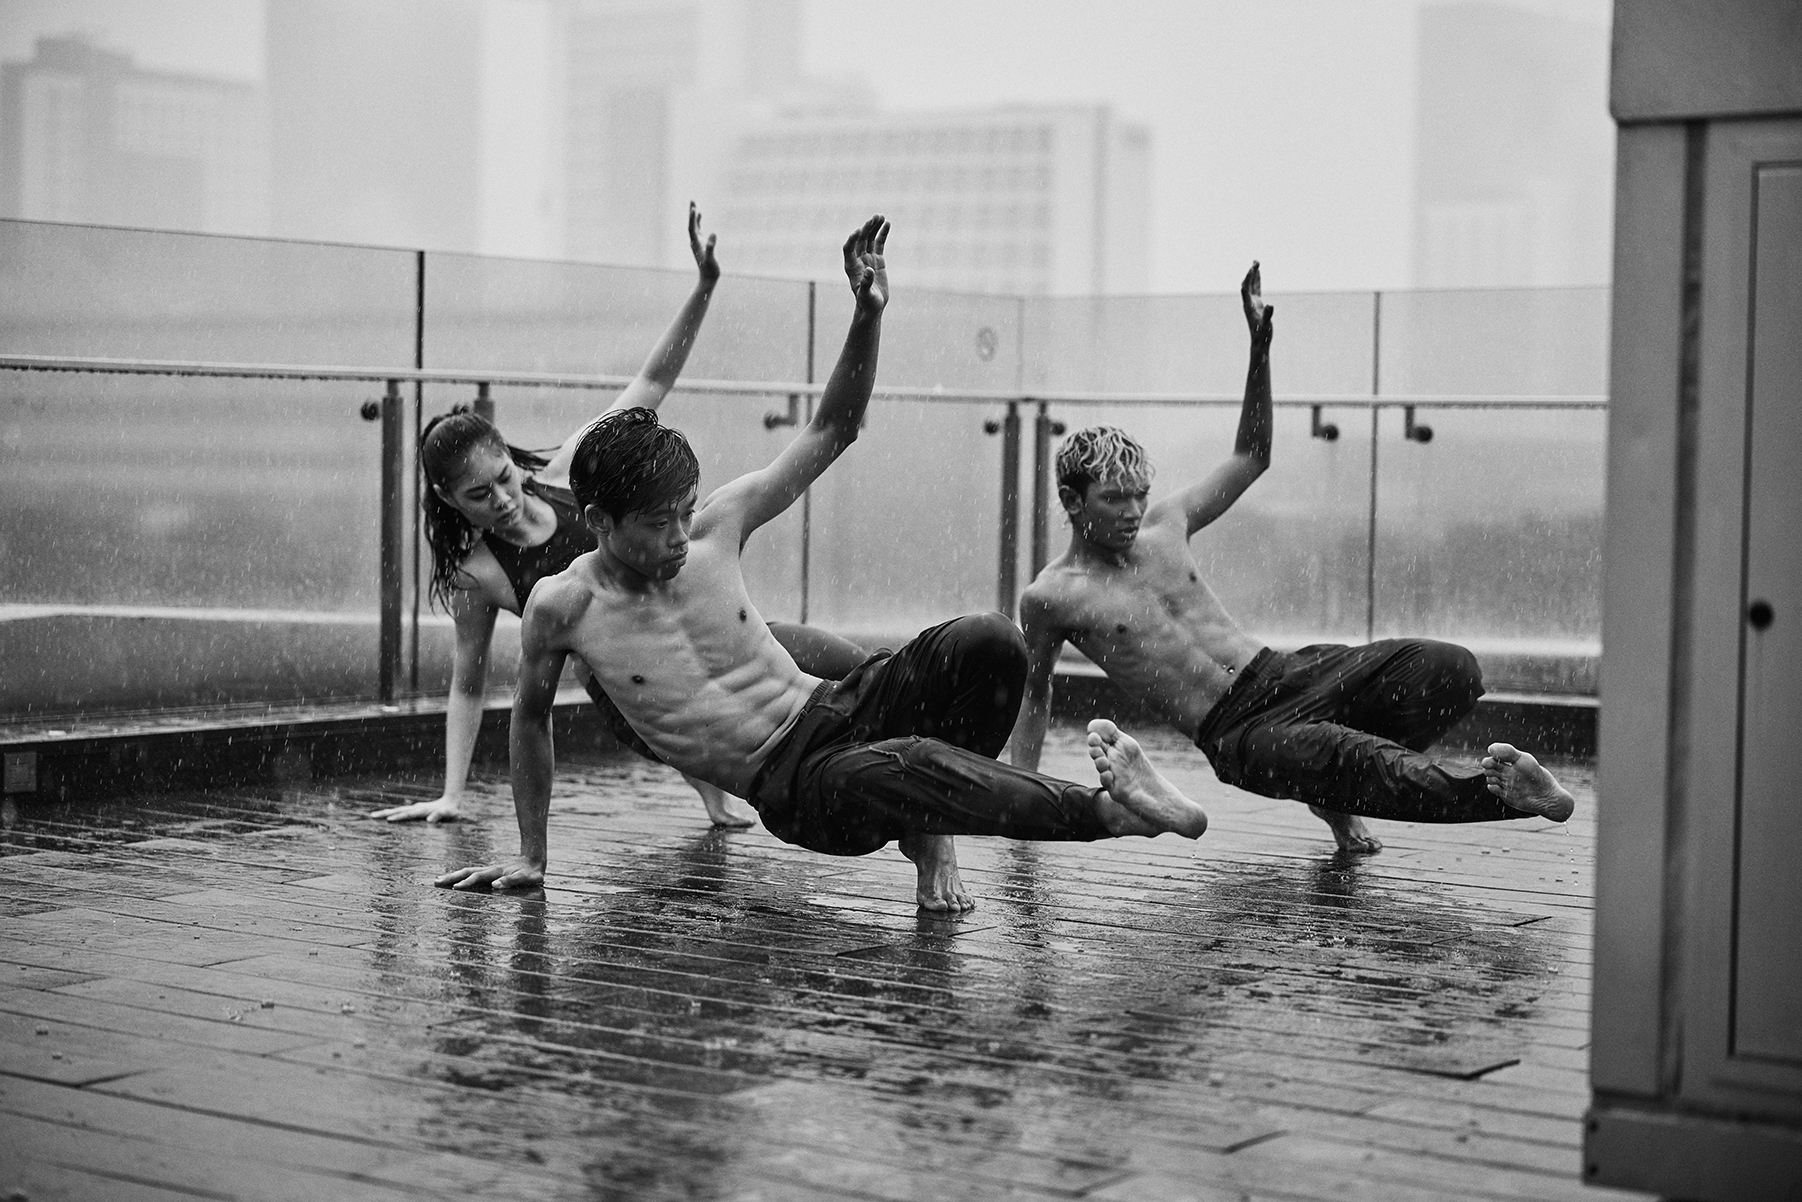 Students dance in a seasonal downpour on the outdoor roof garden of the National Gallery Singapore